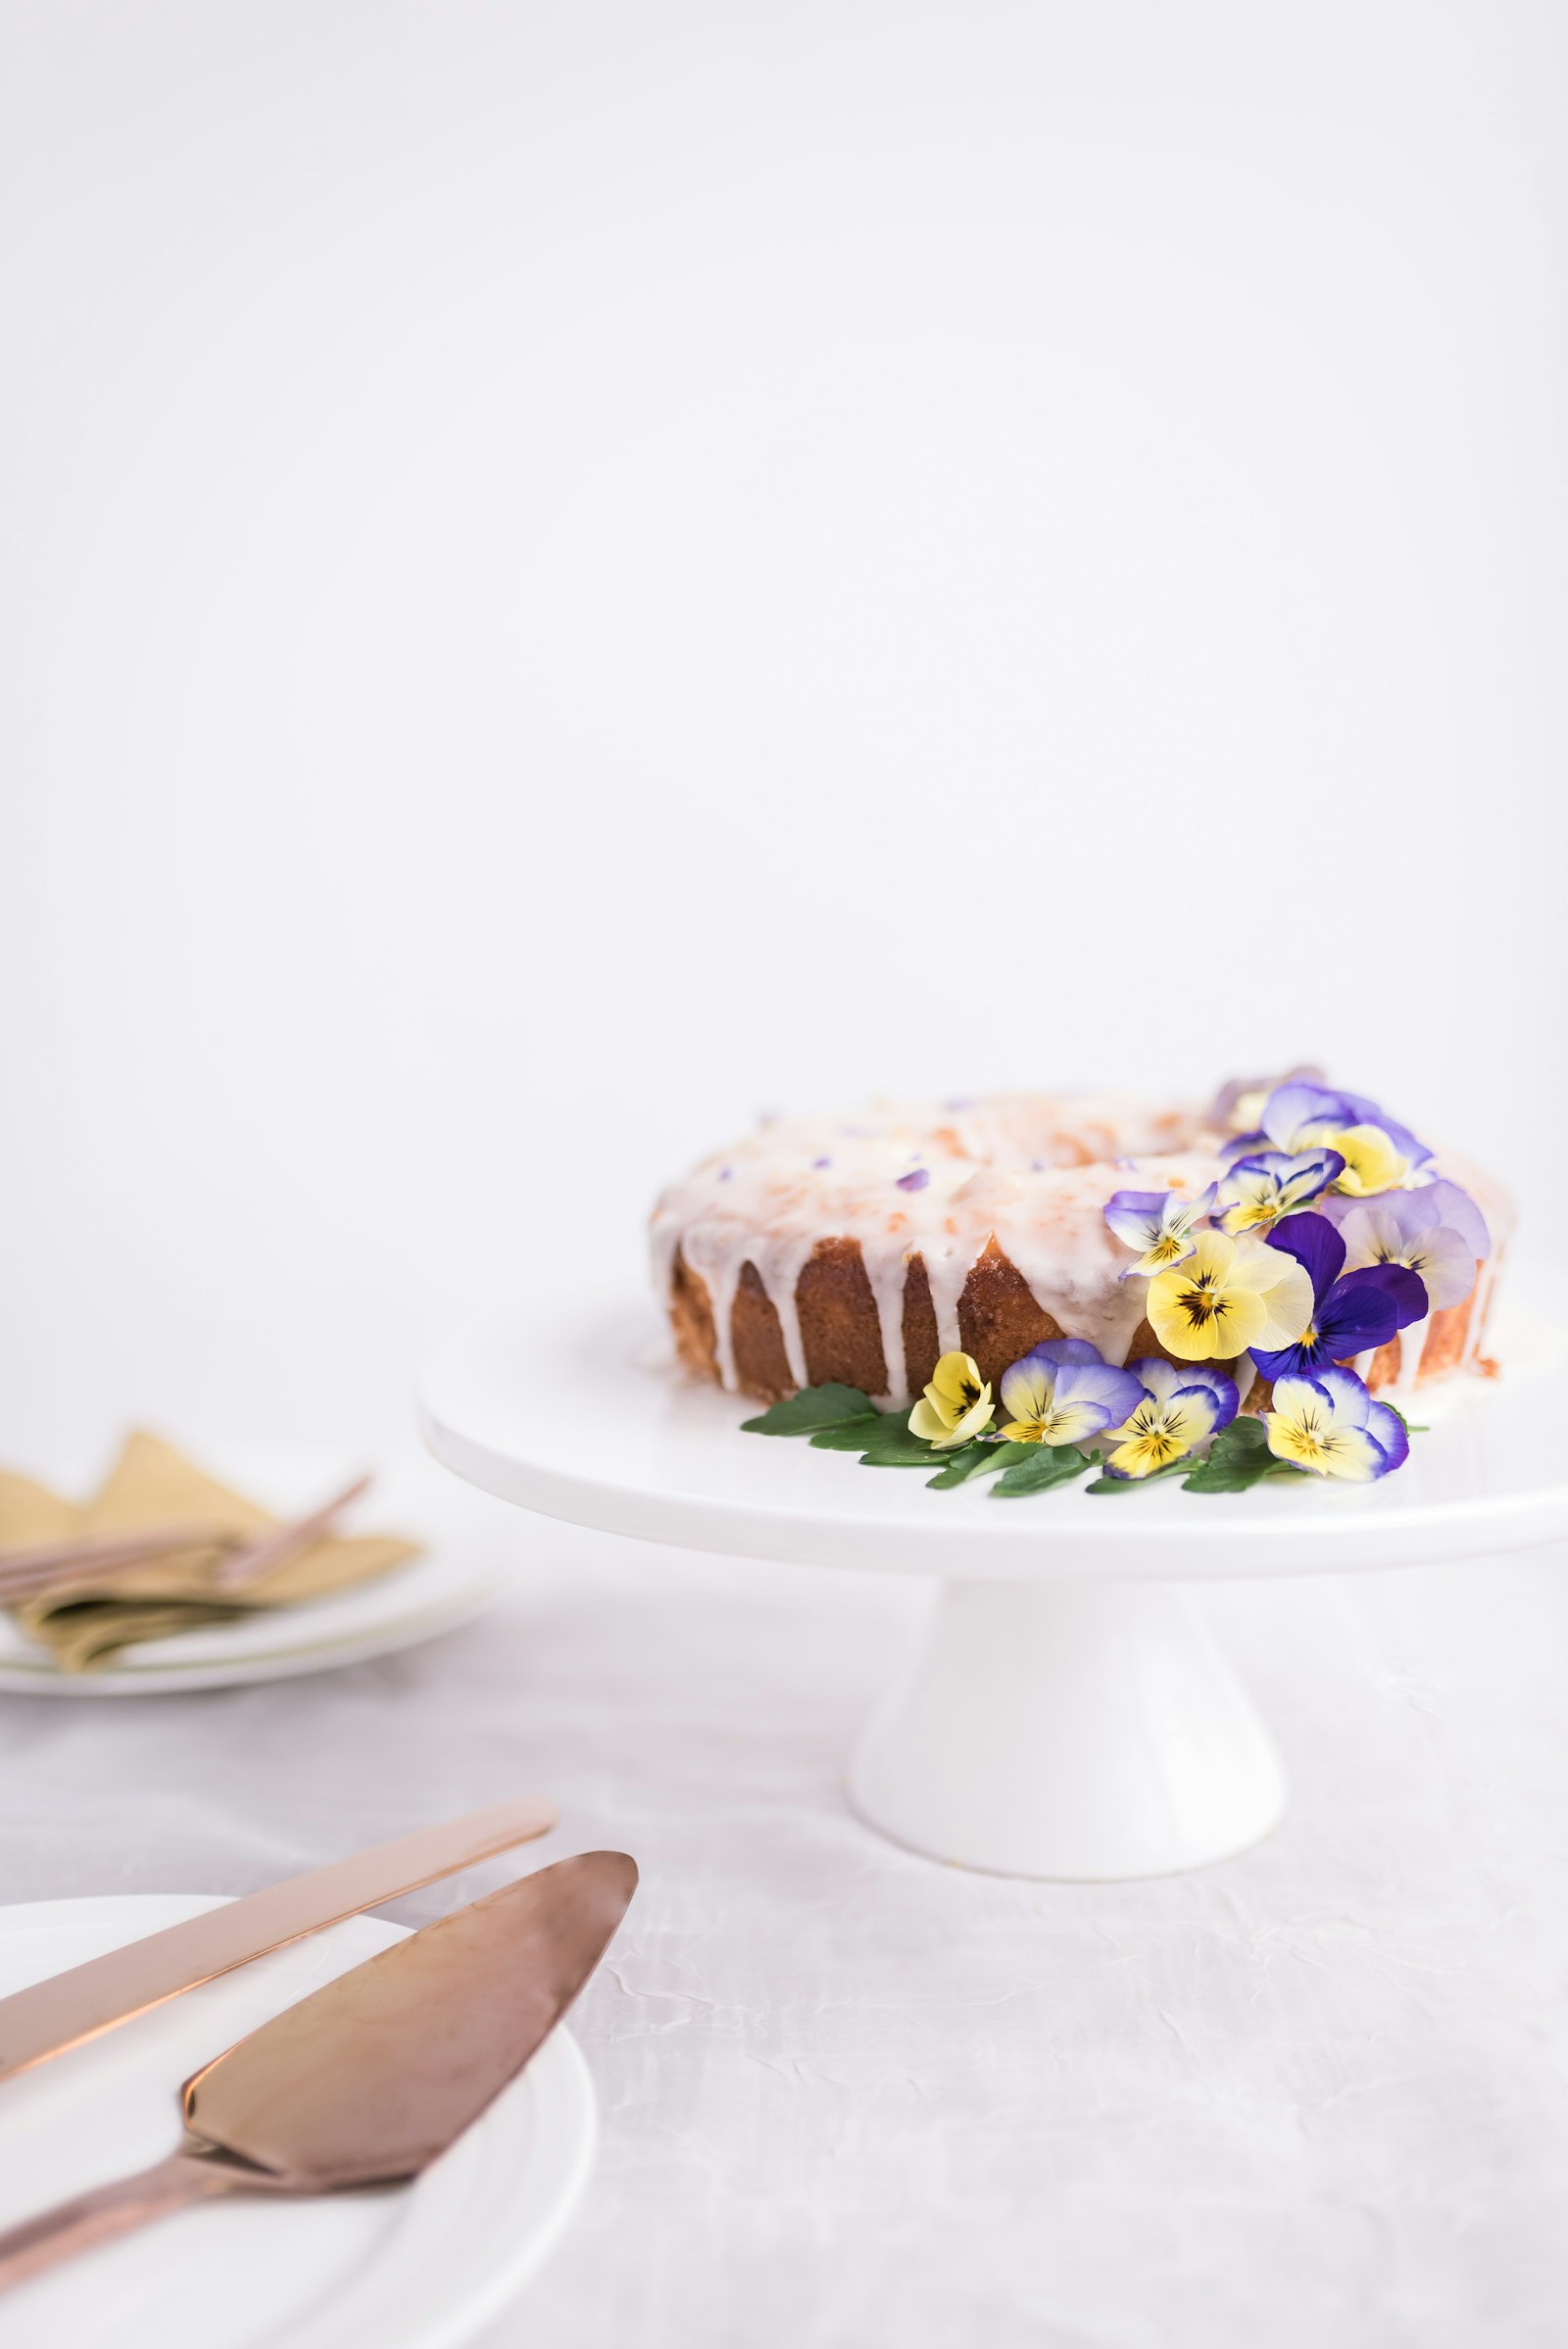 Sigma 35mm F1.4 DG HSM Art sample photo. Cake on ceramic footed photography